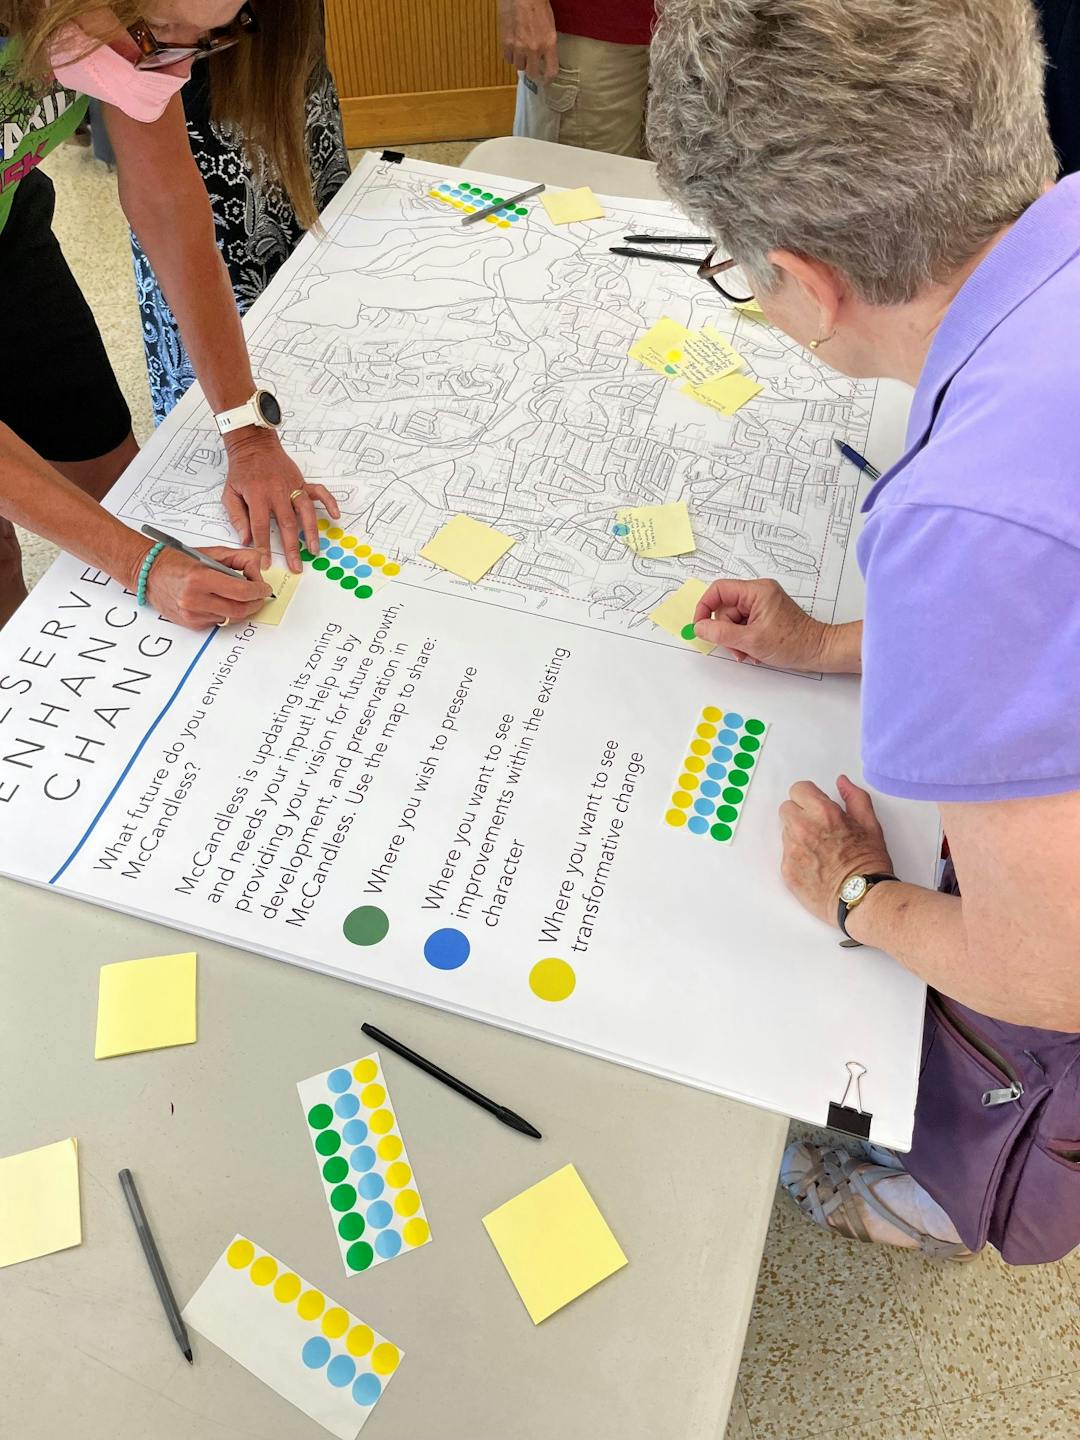 Attendees of the June 23 Open House making notes on a town map.